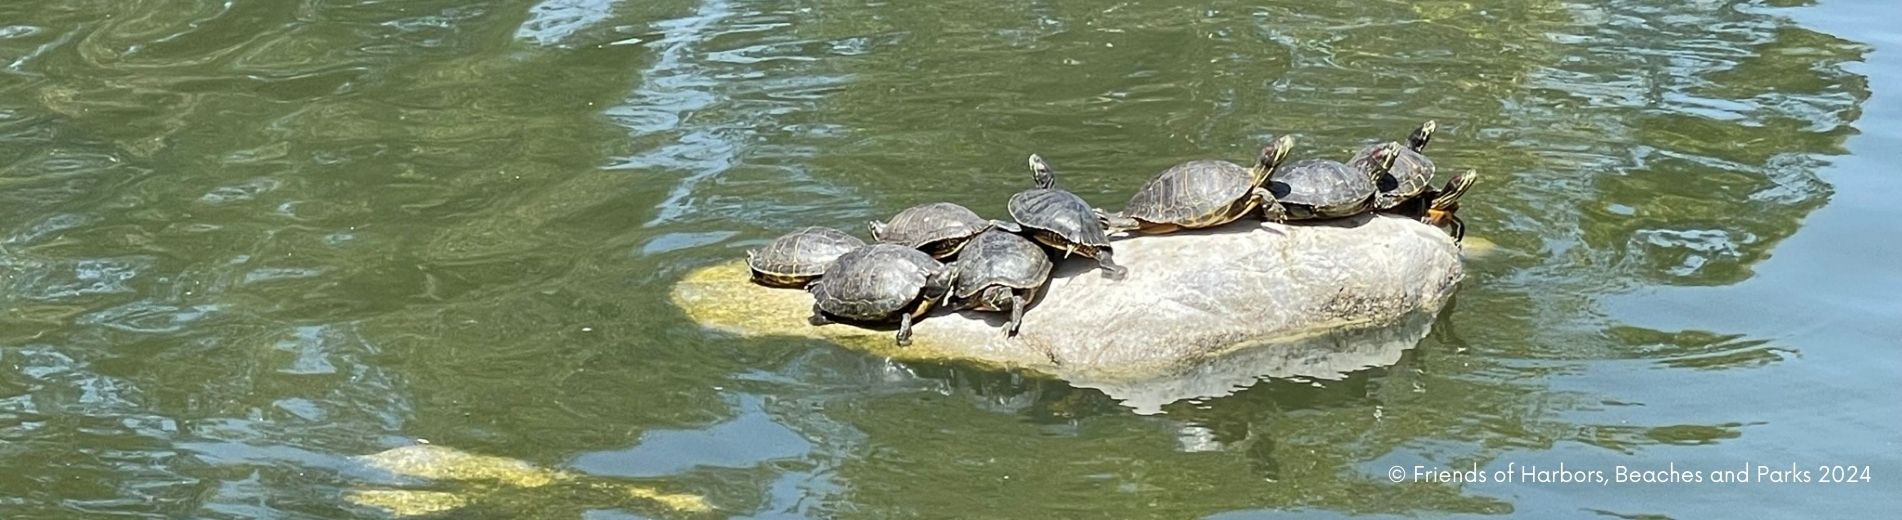 A bunch of turtles having a party on a rock in the middle of a pond